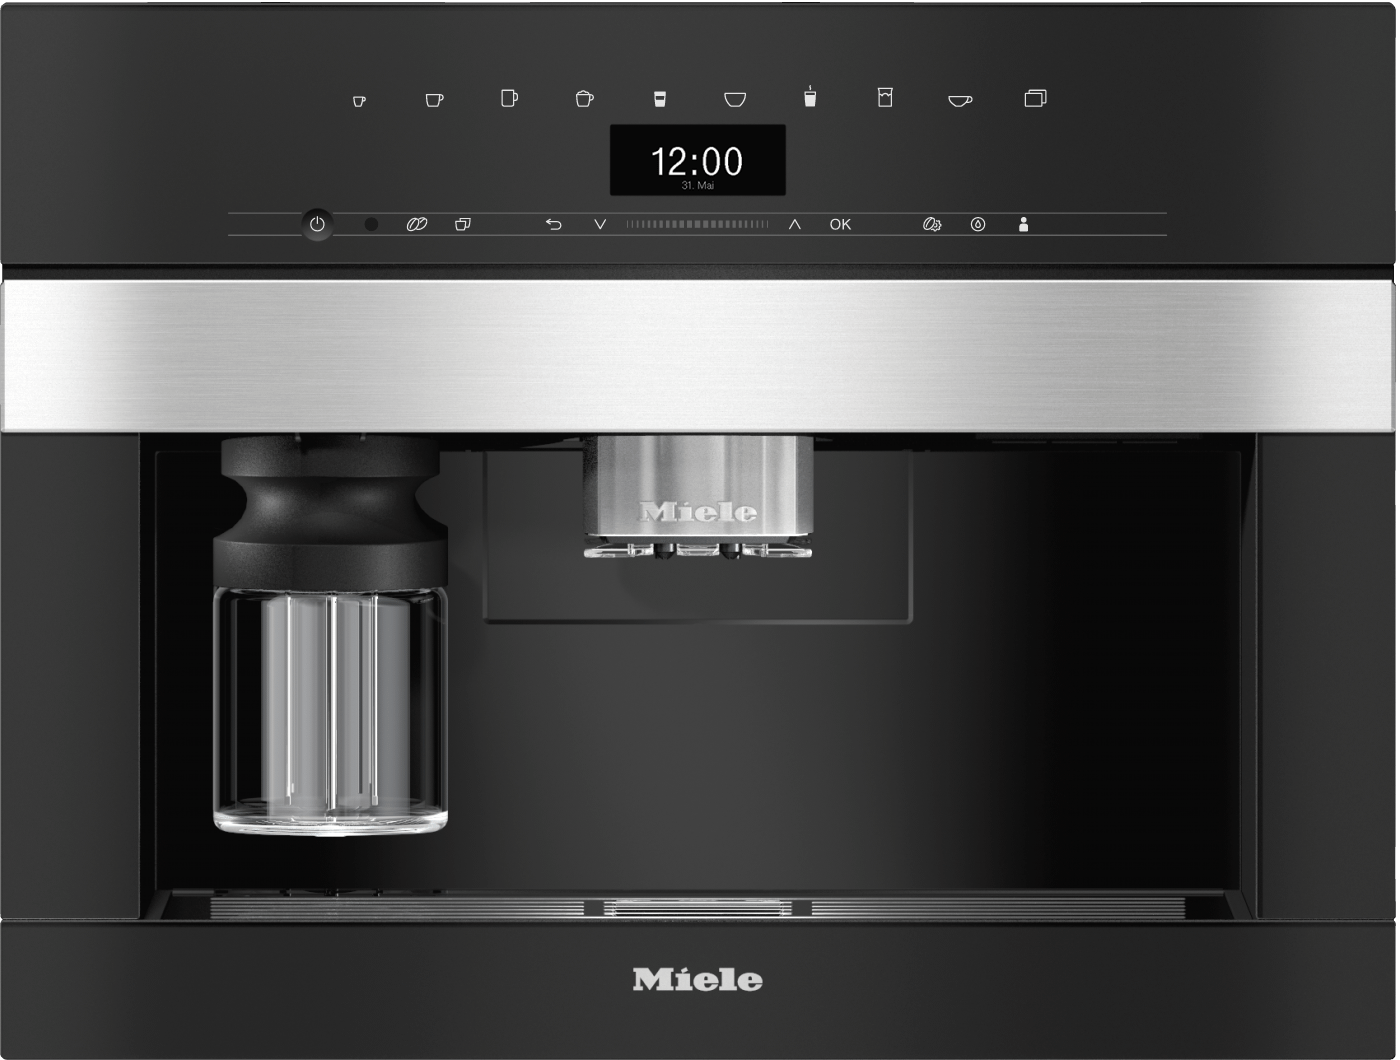 Miele CVA744 STAINLESS STEEL Cva 7440 - Built-In Coffee Machine In A Perfectly Combinable Design With Patented Cupsensor For Perfect Coffee.